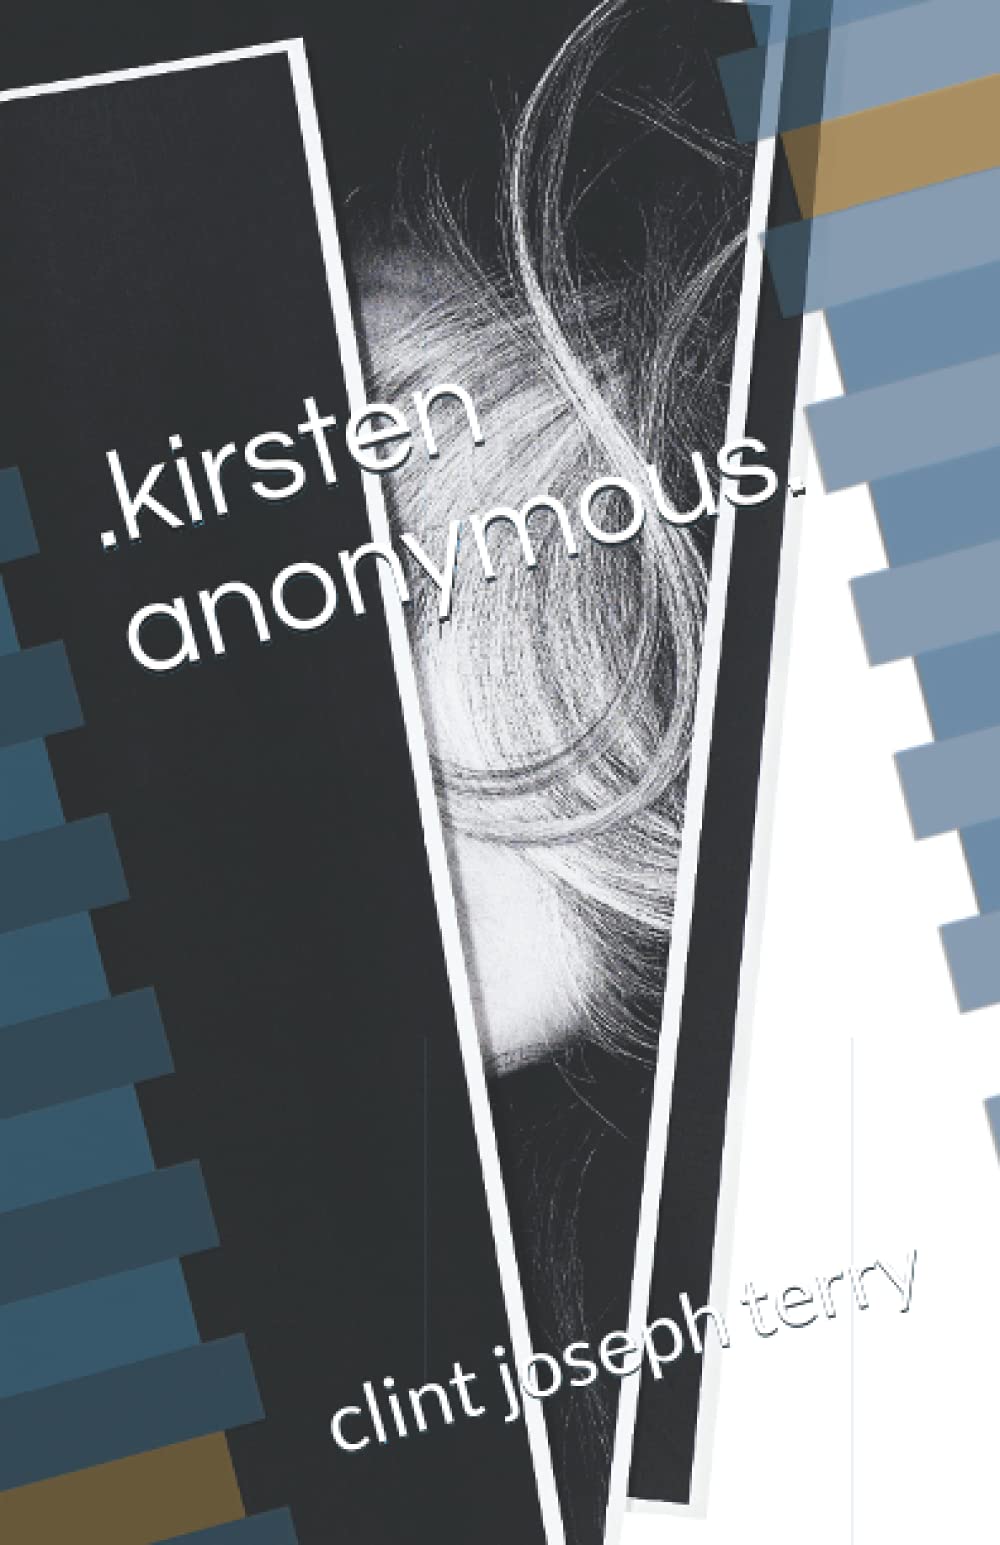 FREE: Kirsten Anonymous by Clint Joseph Terry